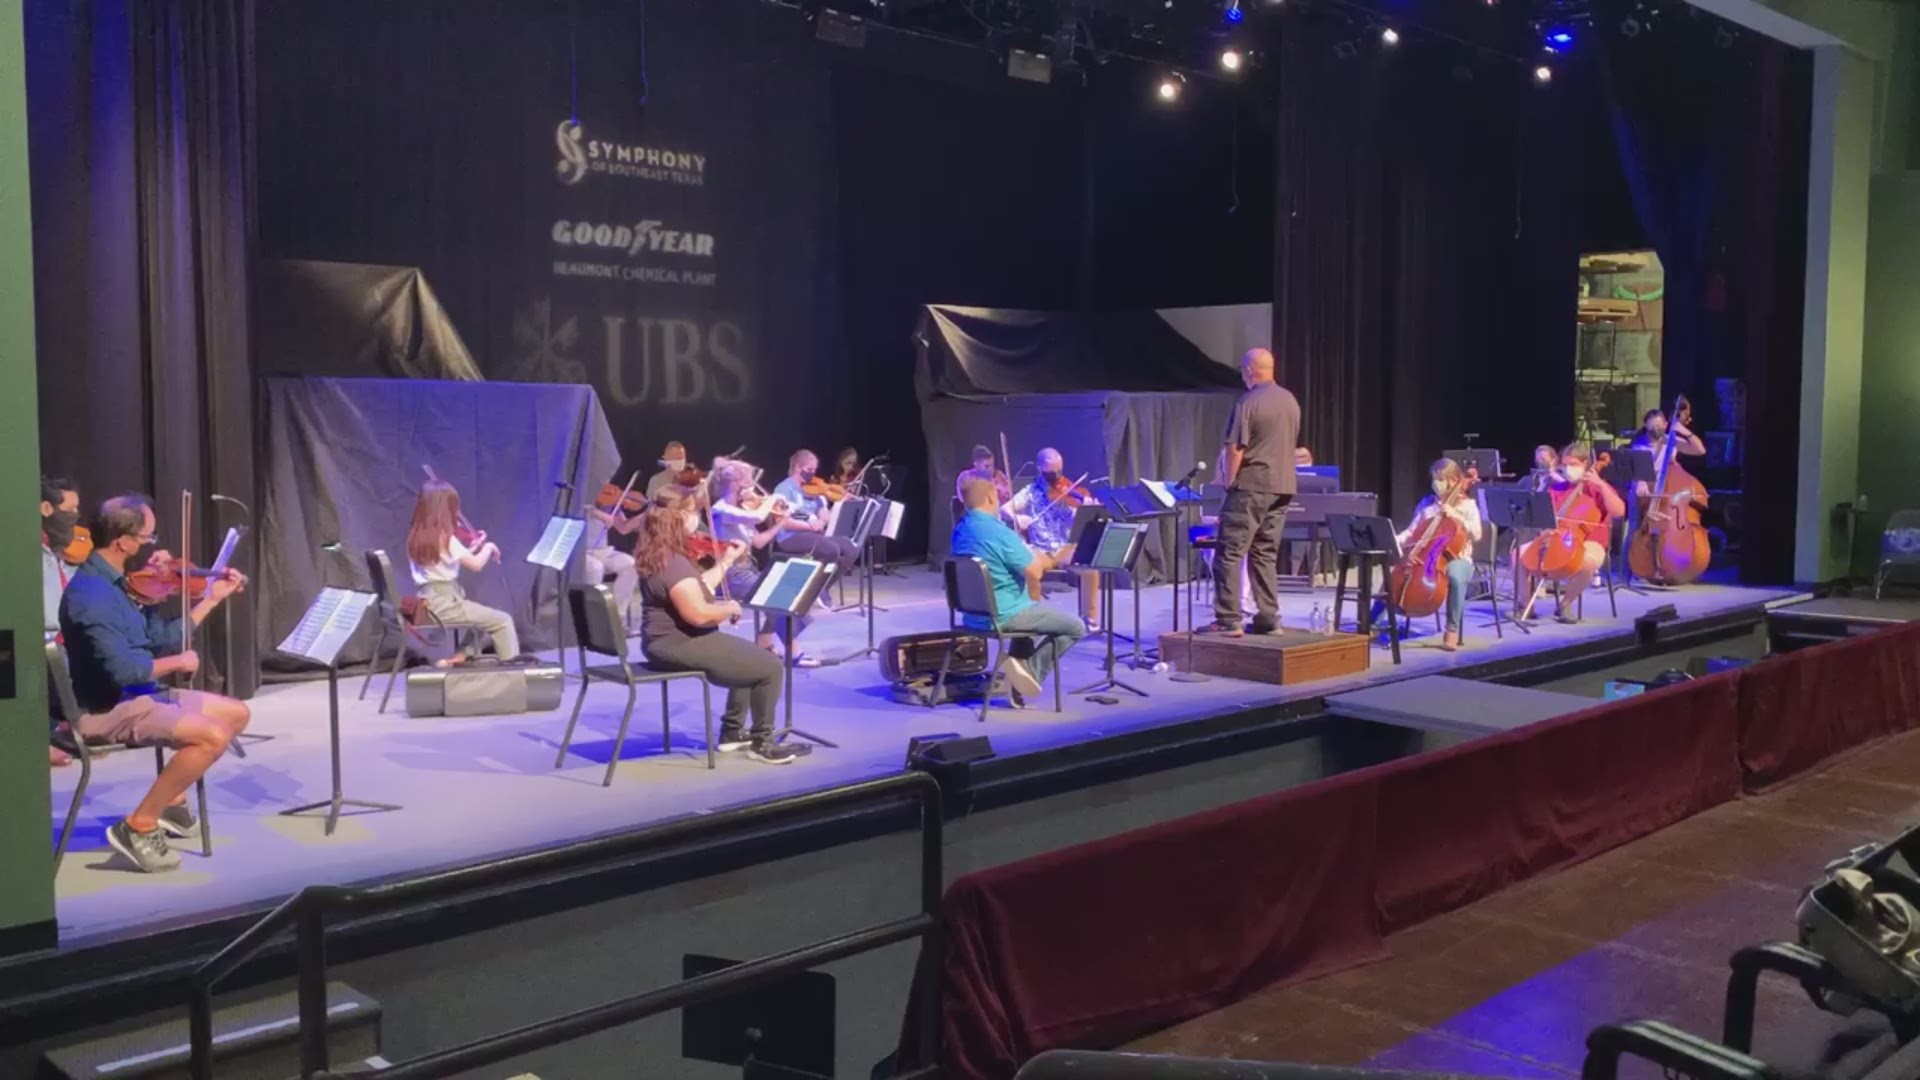 The Symphony of Southeast Texas is rehearsing for a series of virtual concerts while the Julie Rogers Theatre remains closed due to the pandemic.